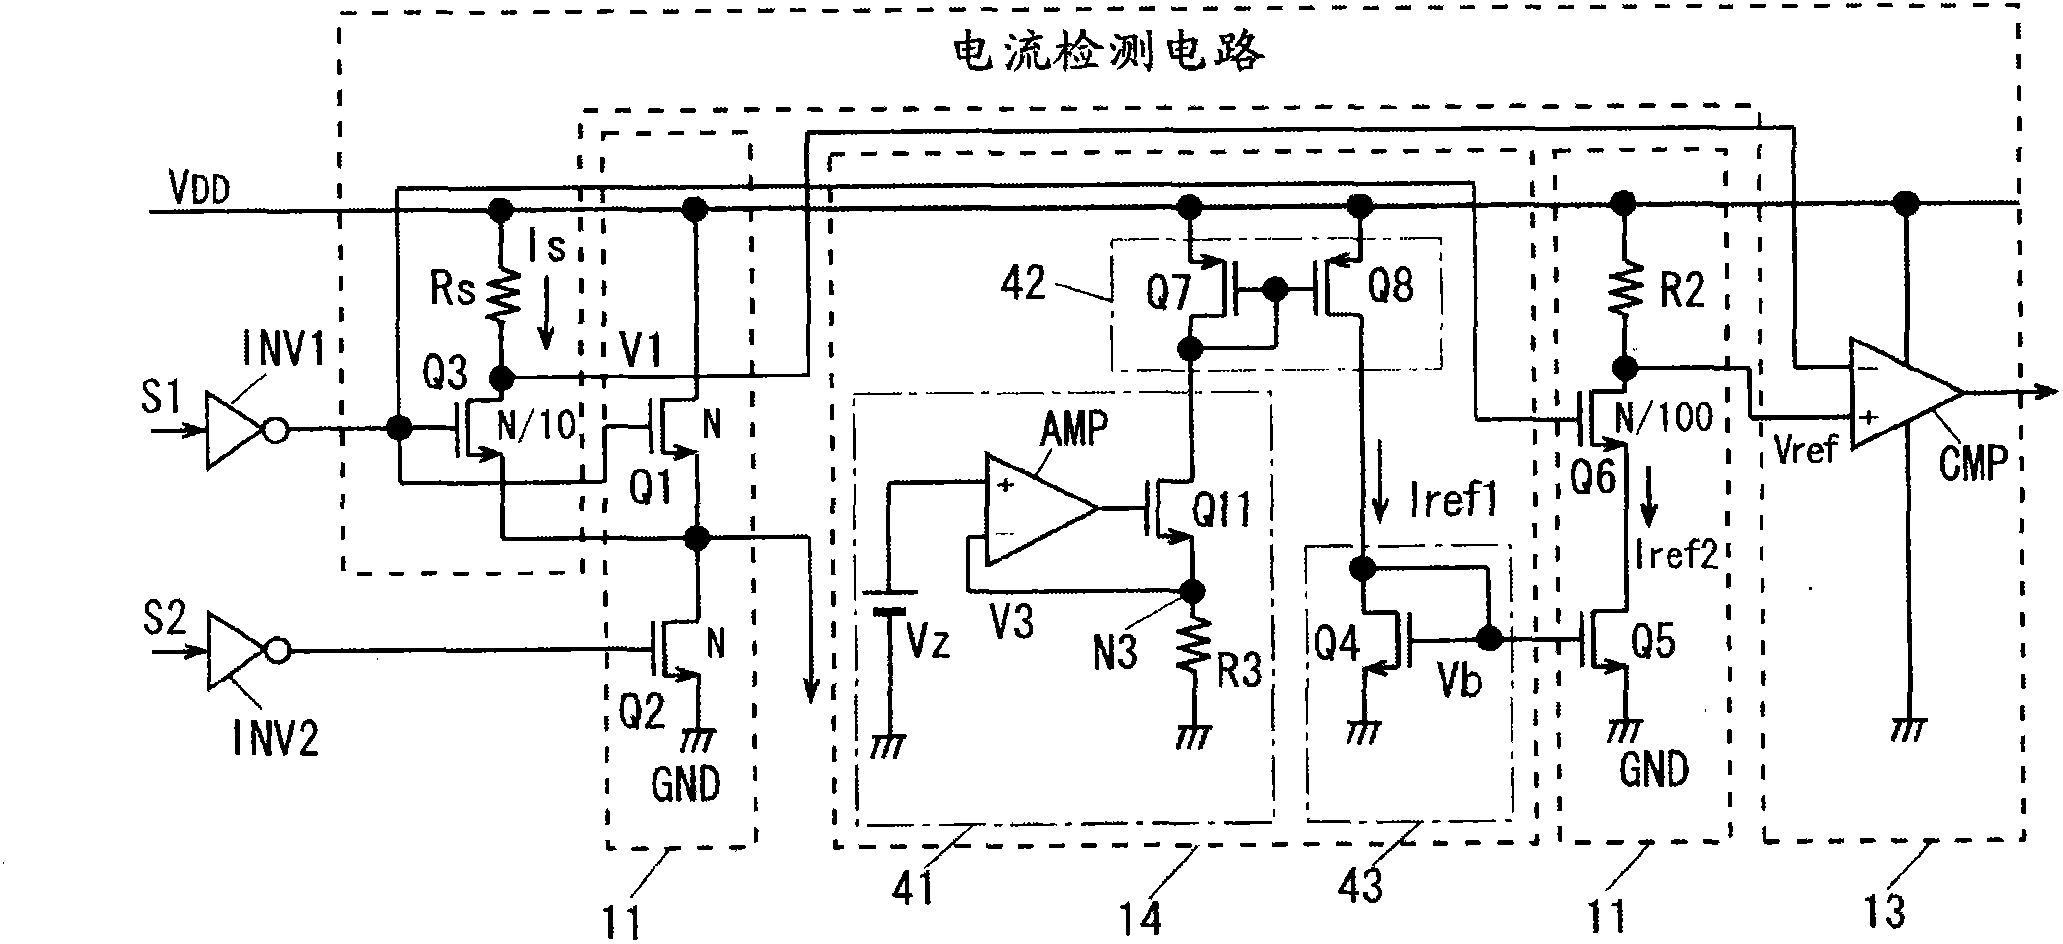 Output current detecting circuit and transmission circuit